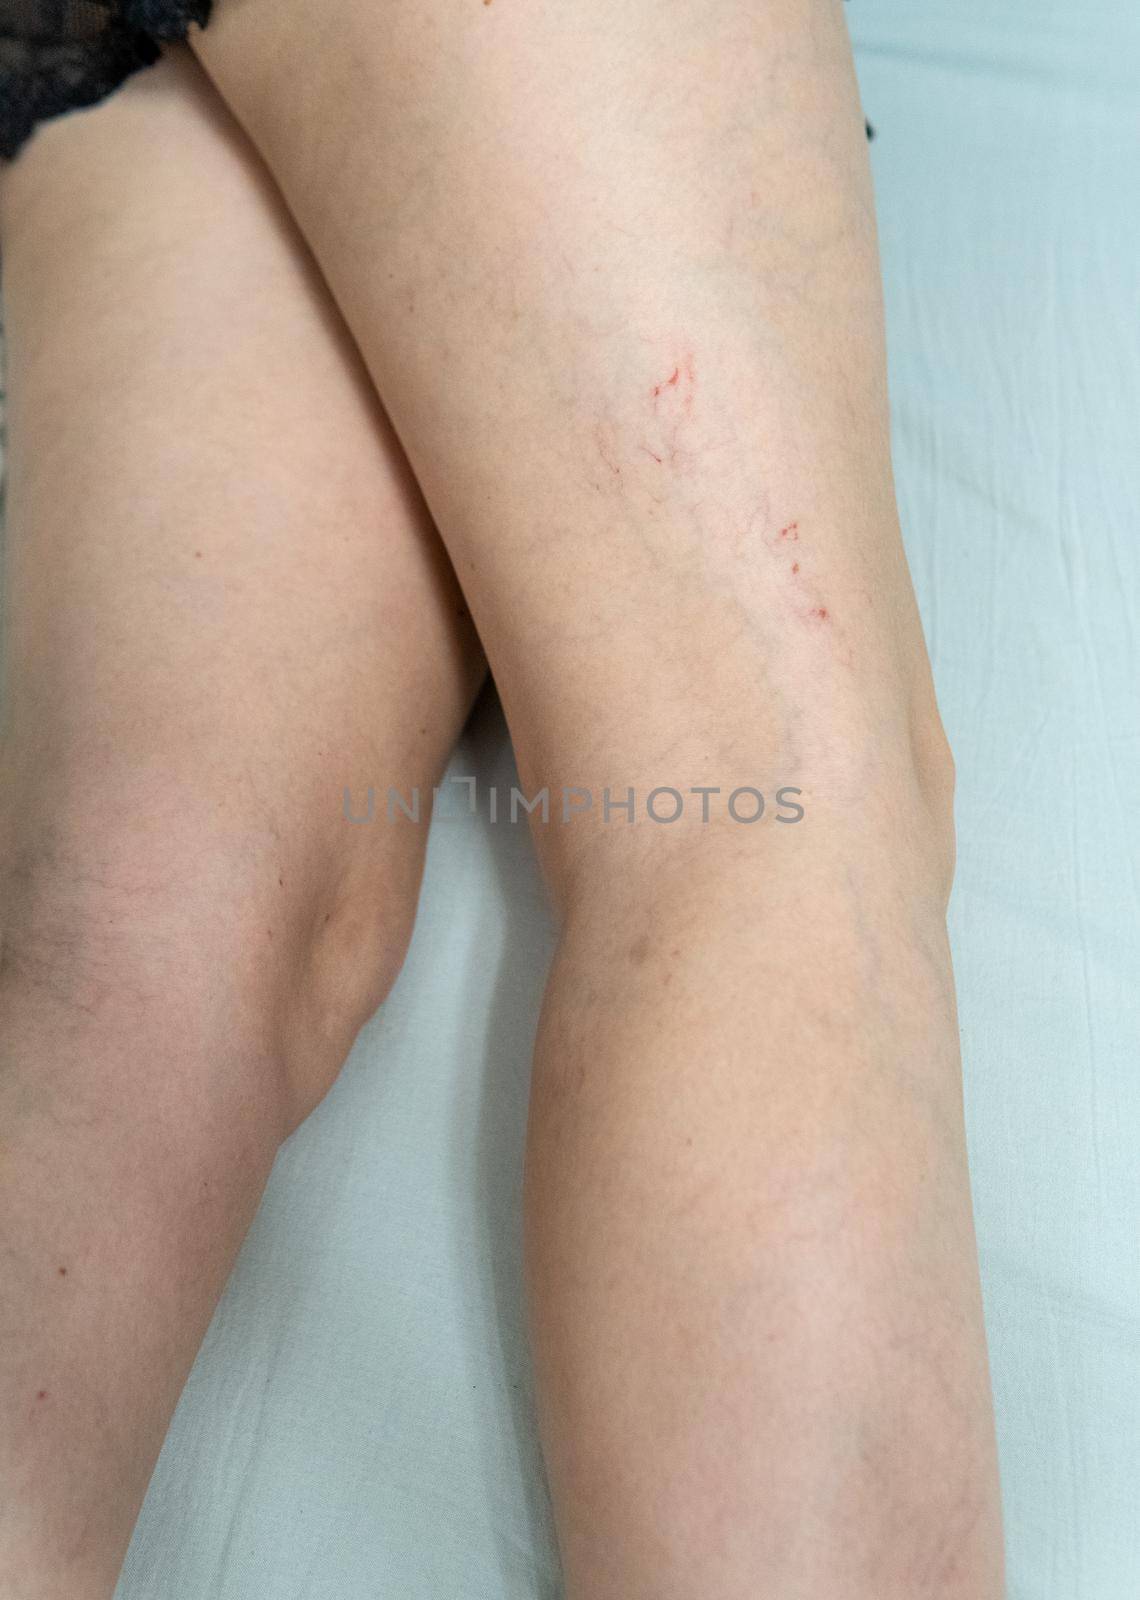 removal of blood vessels by laser surgery, leg treatment beauty, cutout anatomy. Help risk dermis, aesthetic telangiectases physical by 89167702191